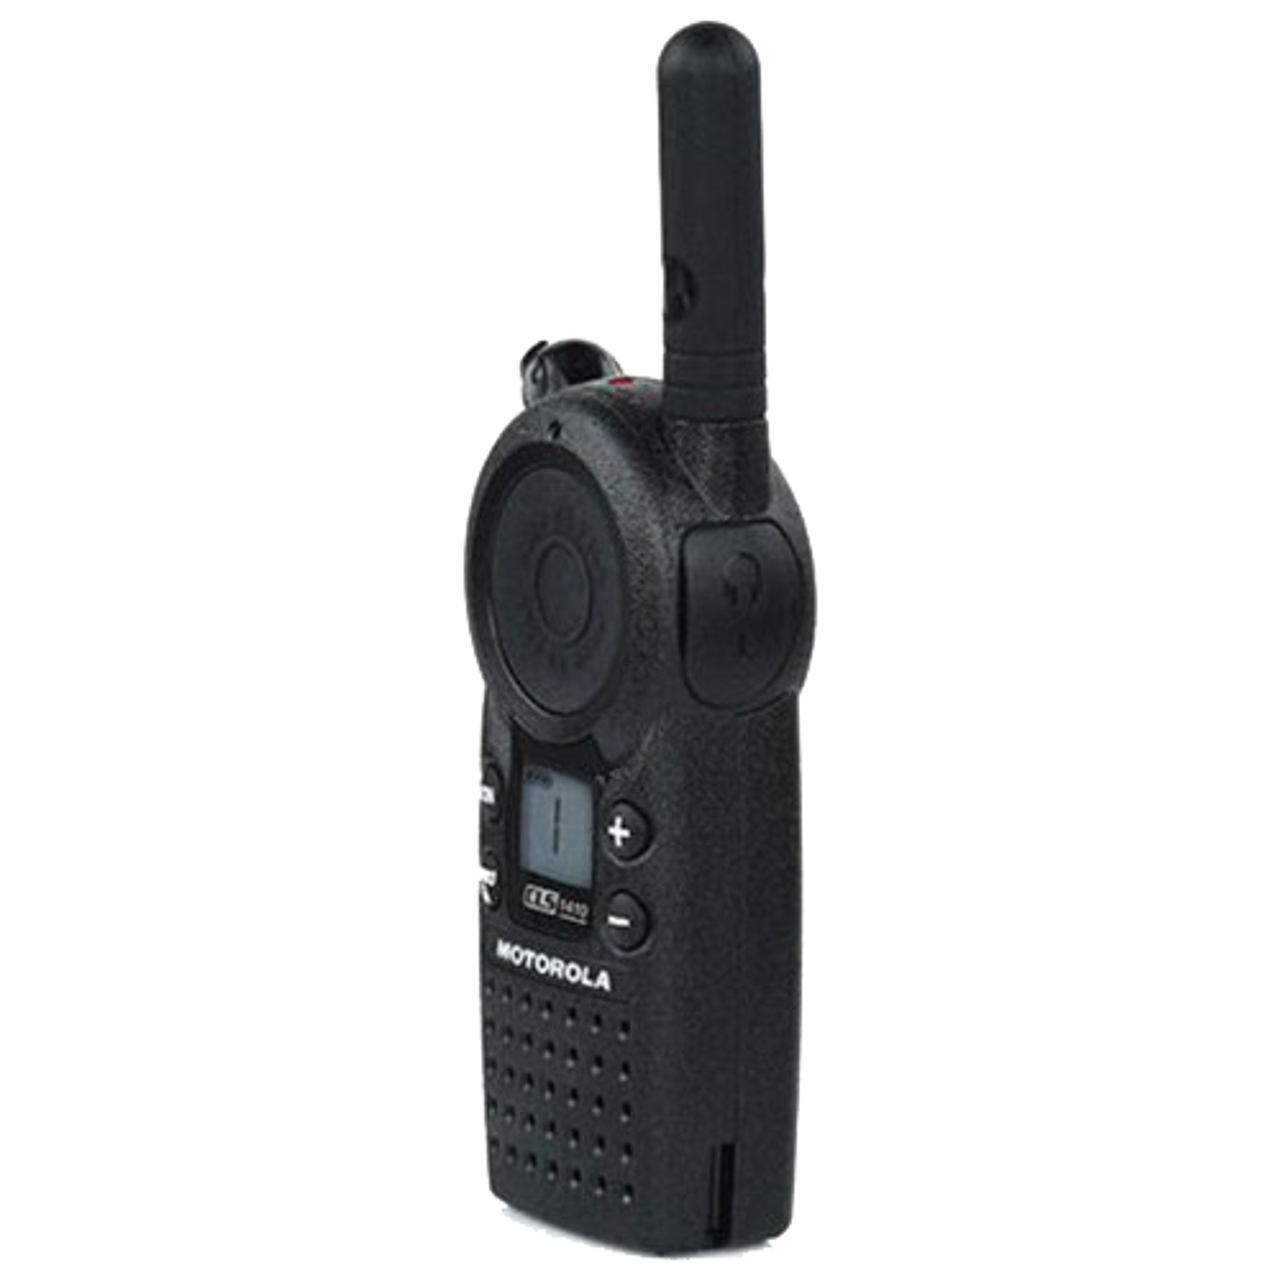 Professional Rechargeable Walkie Talkies, Two Way Radios Walky Talky f –  USA Camp Gear